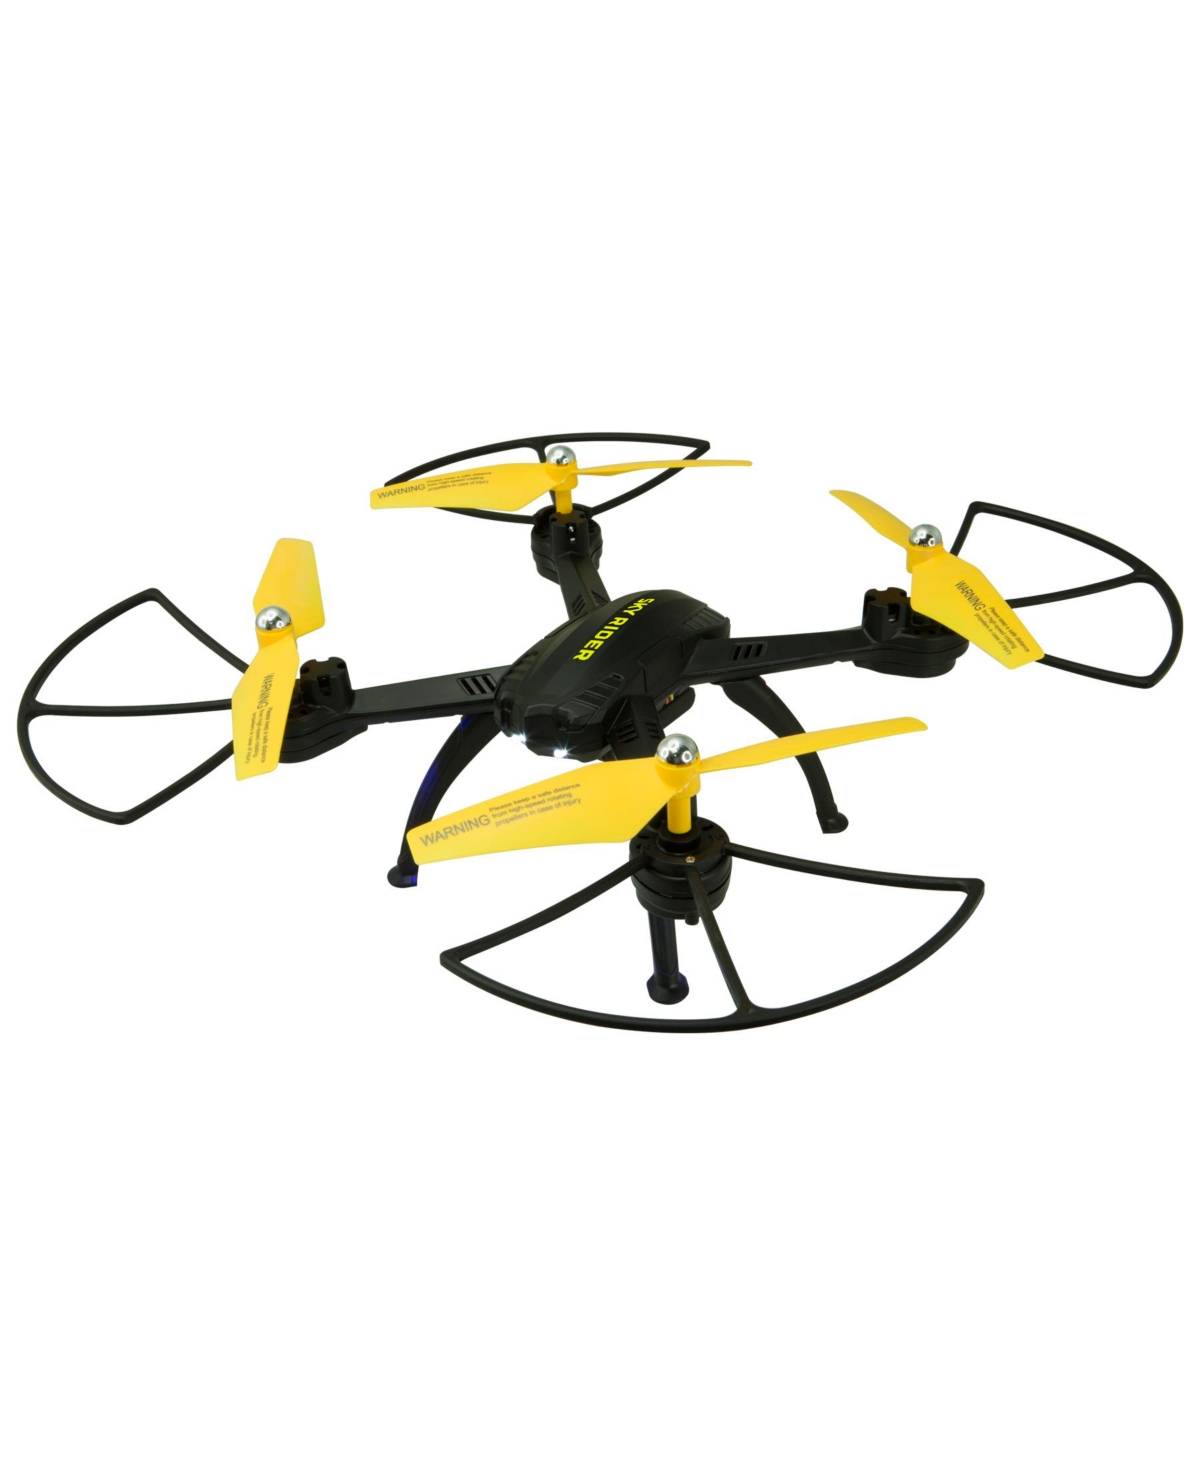 Ilive Sky Rider X-11 Stratosphere Quad Copter Drone With Wi-fi Camera, 14.37" X 14.37" In Black